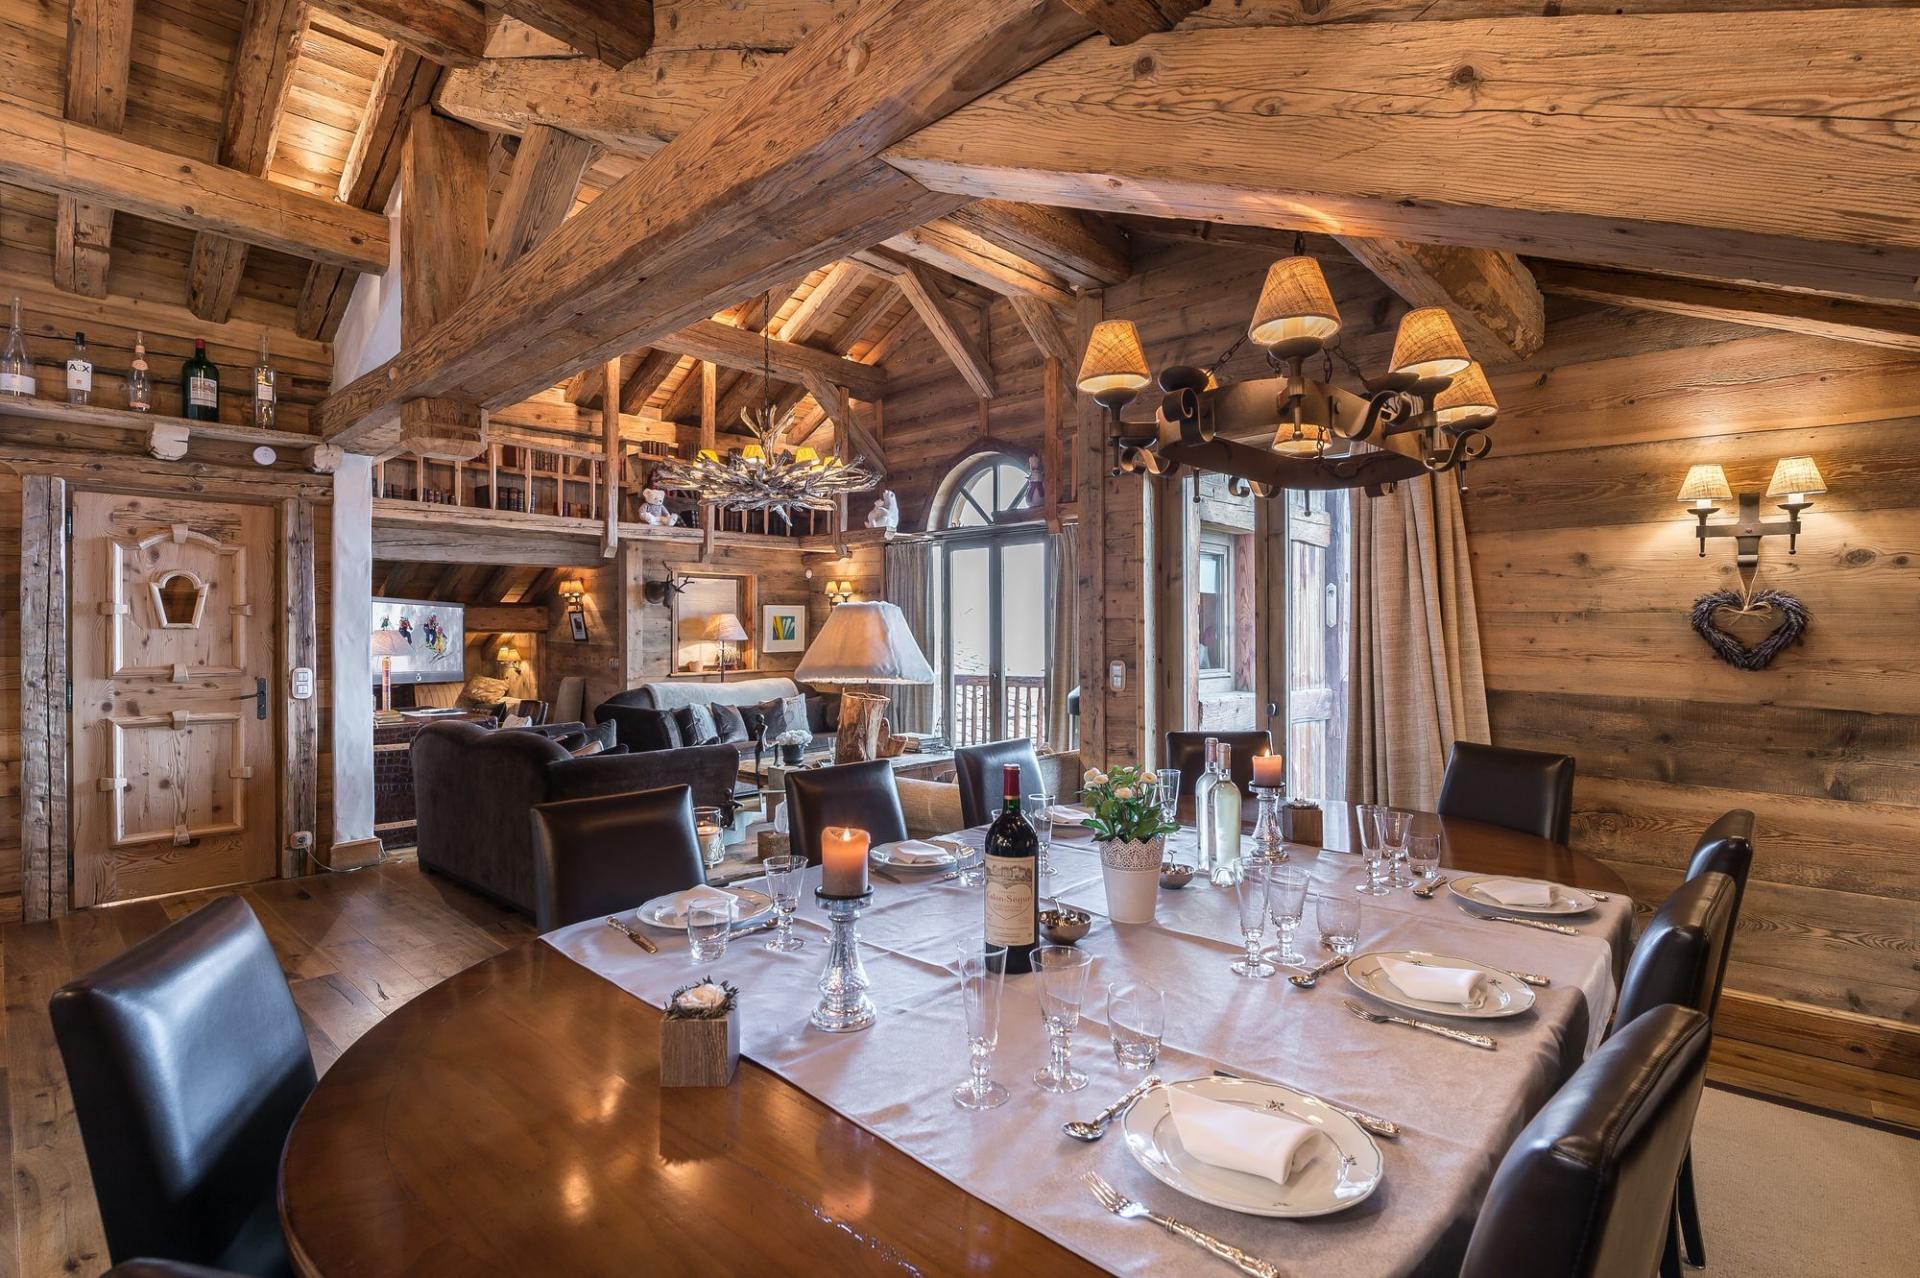 A BEAUTIFUL LUXURY CHALET TO RENT  IN COURCHEVEL IN THE FRENCH ALPS